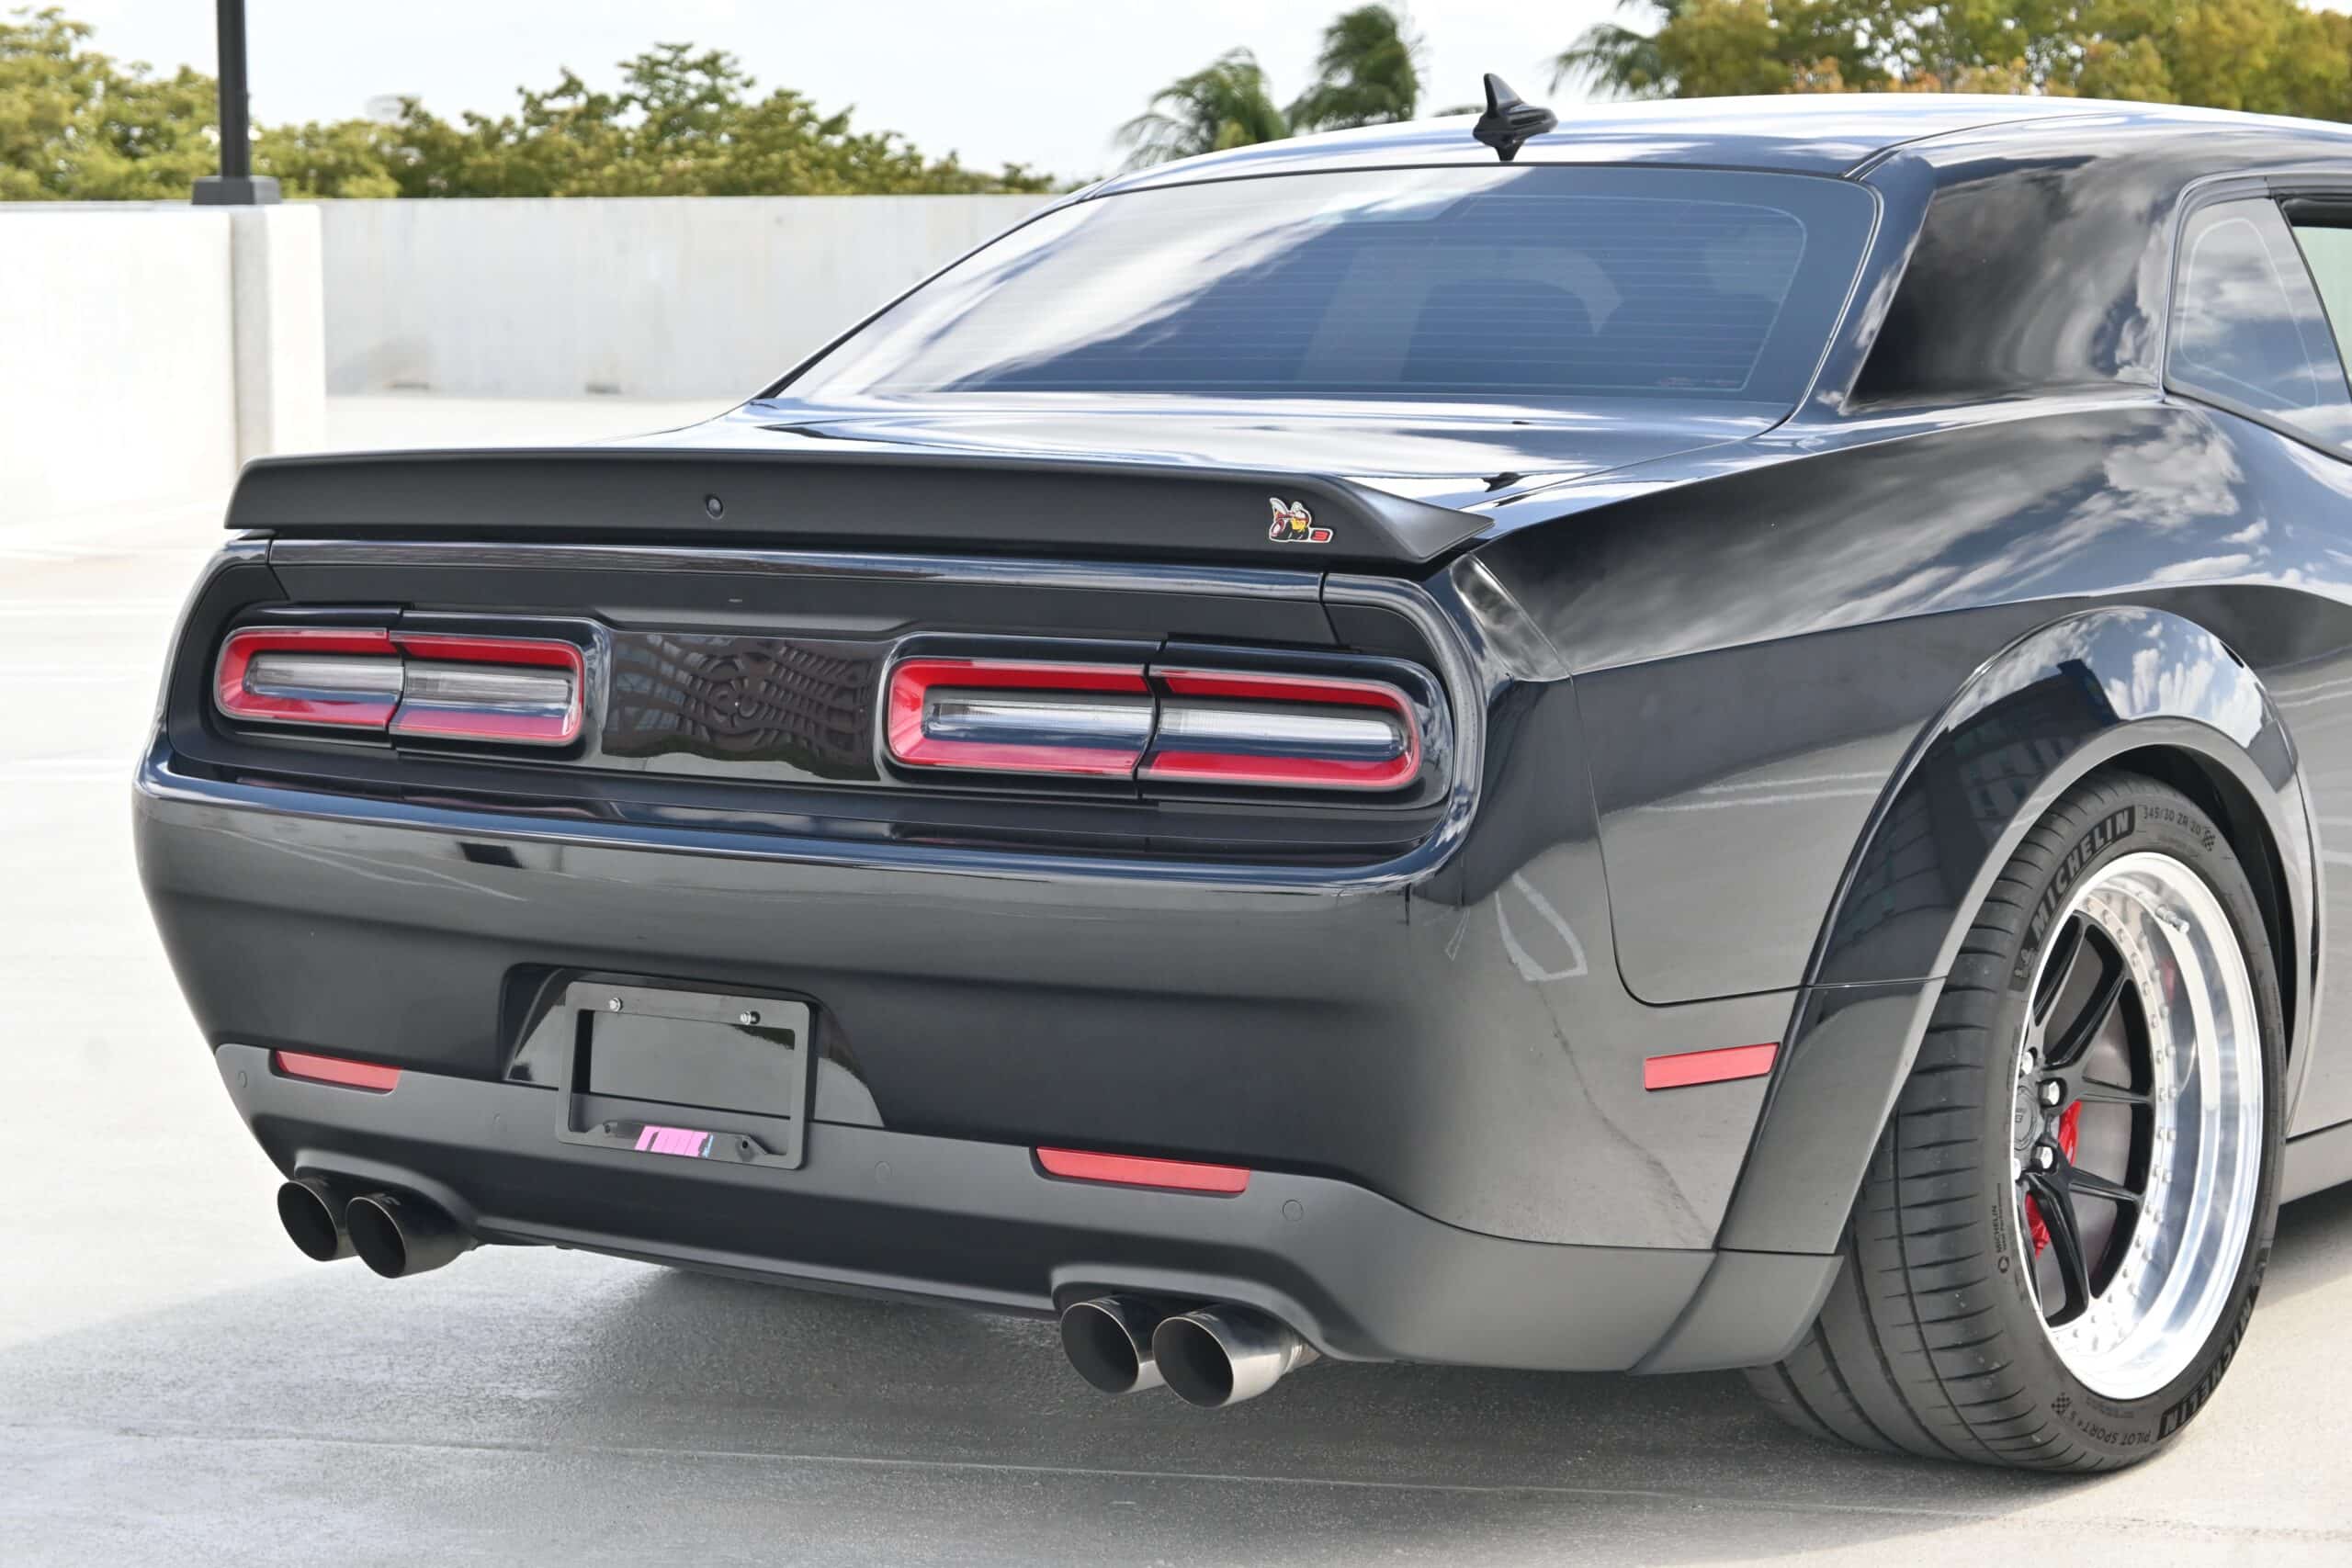 2021 Dodge Challenger R/T 392 Widebody SHOW CAR / Rare 6 Speed Manual / $20,000 in mods / Makes 627 Wheel Horsepower